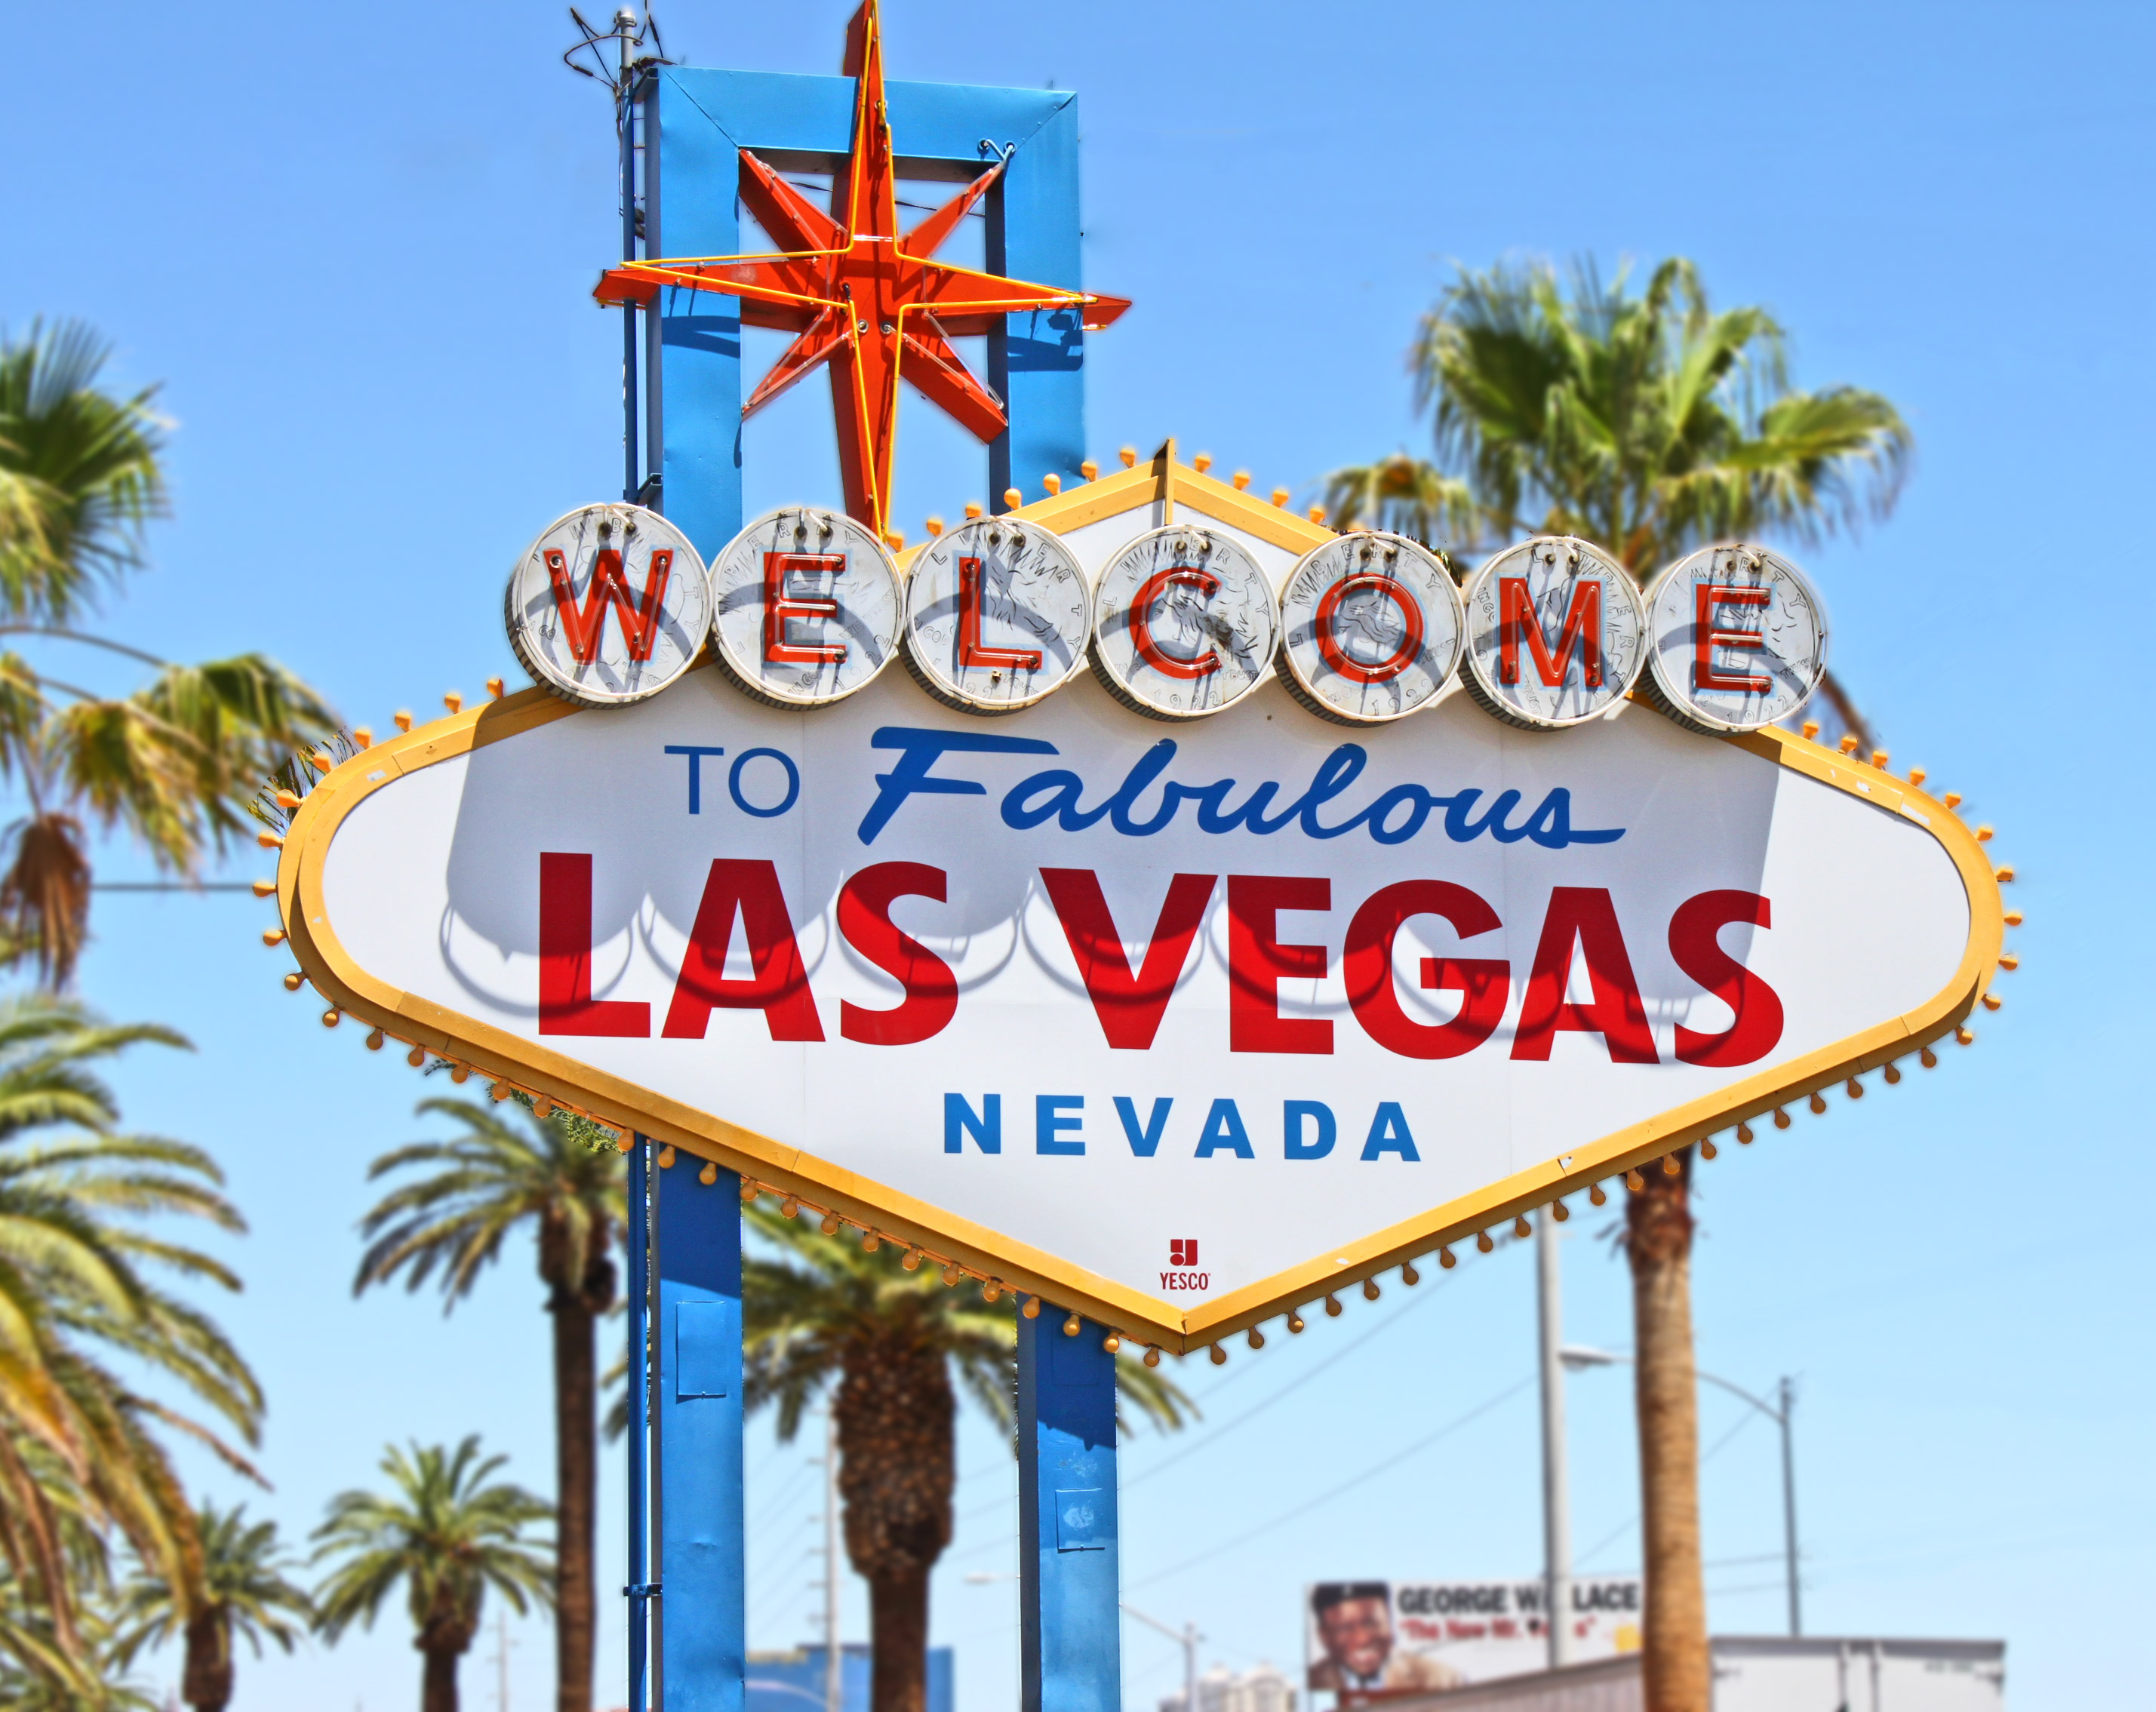 Daily Neon: Welcome to Las Vegas Sign